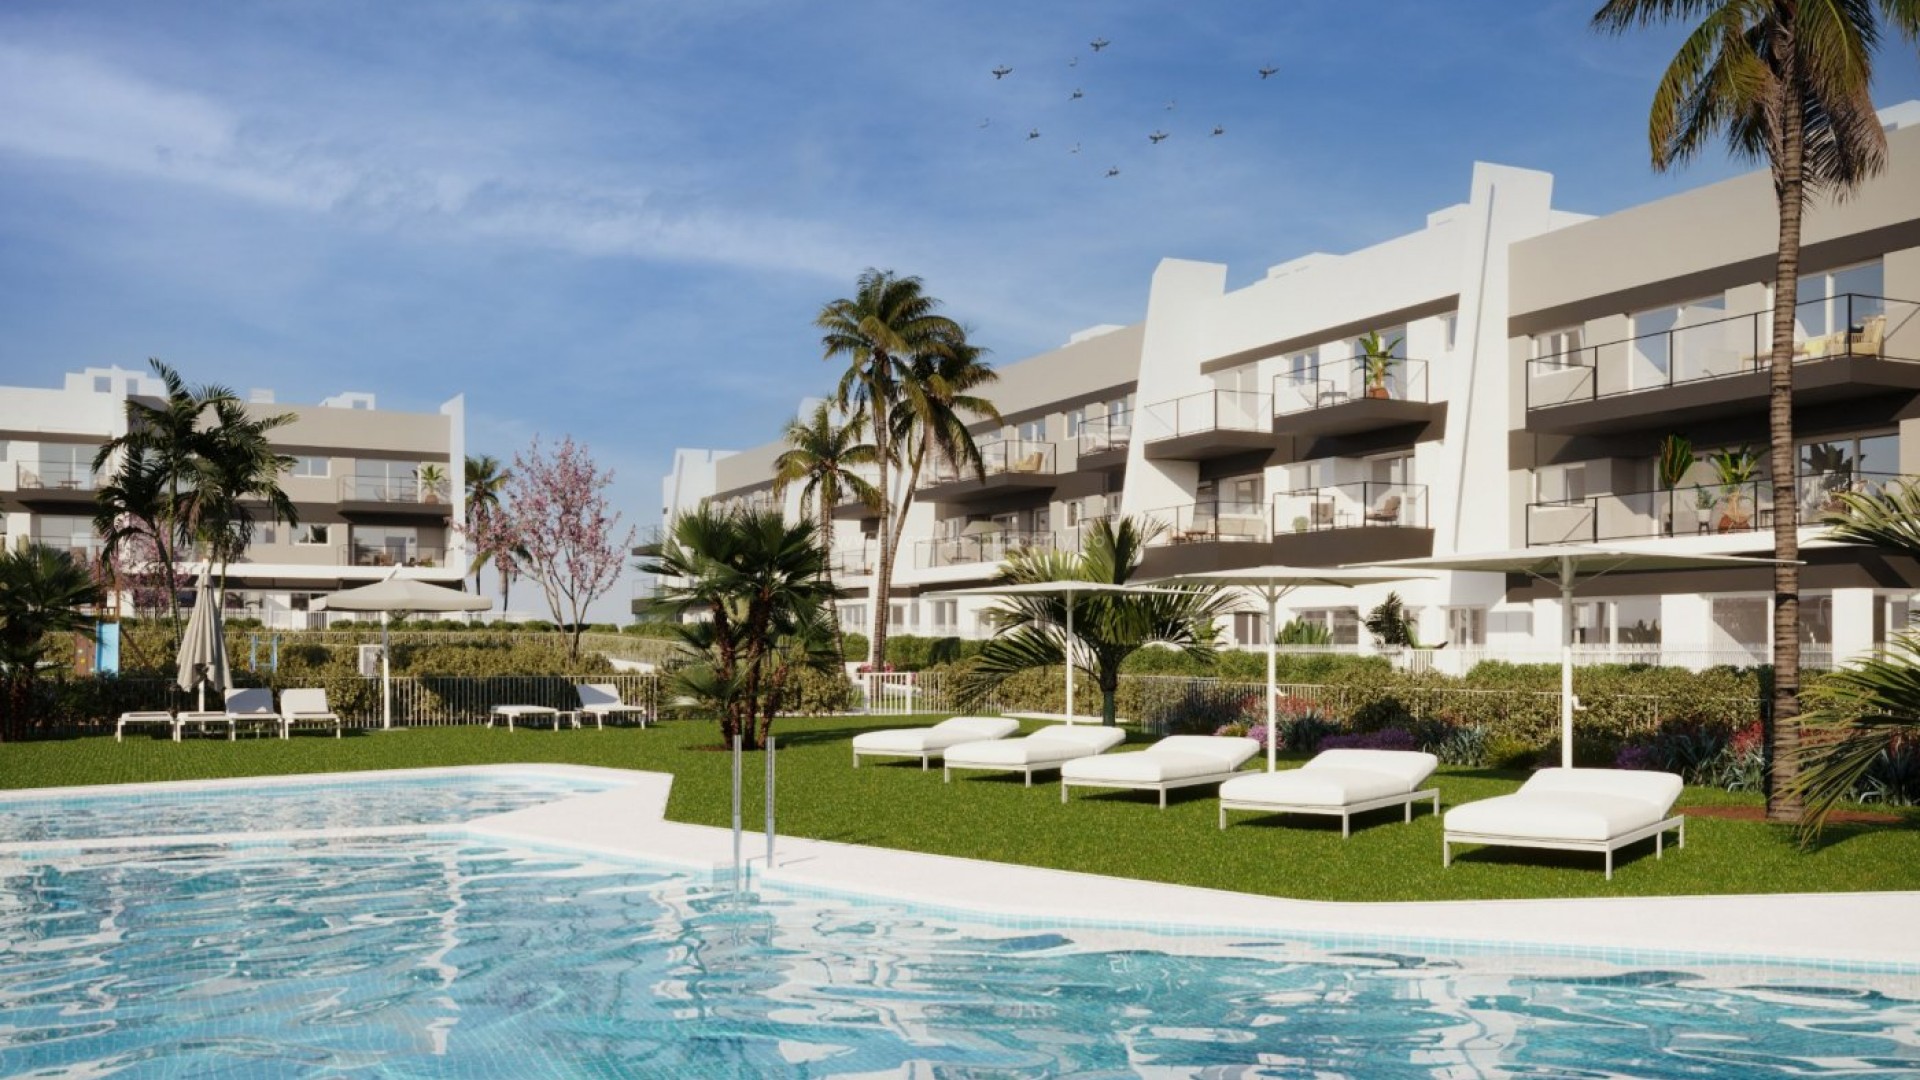 Exclusive apartments in Gran Alacant, Santa Pola, 2/3 bedrooms, 2 bathrooms, close to Clot de Galvany Natural Park, a short distance from the wonderful beaches of Carabassí